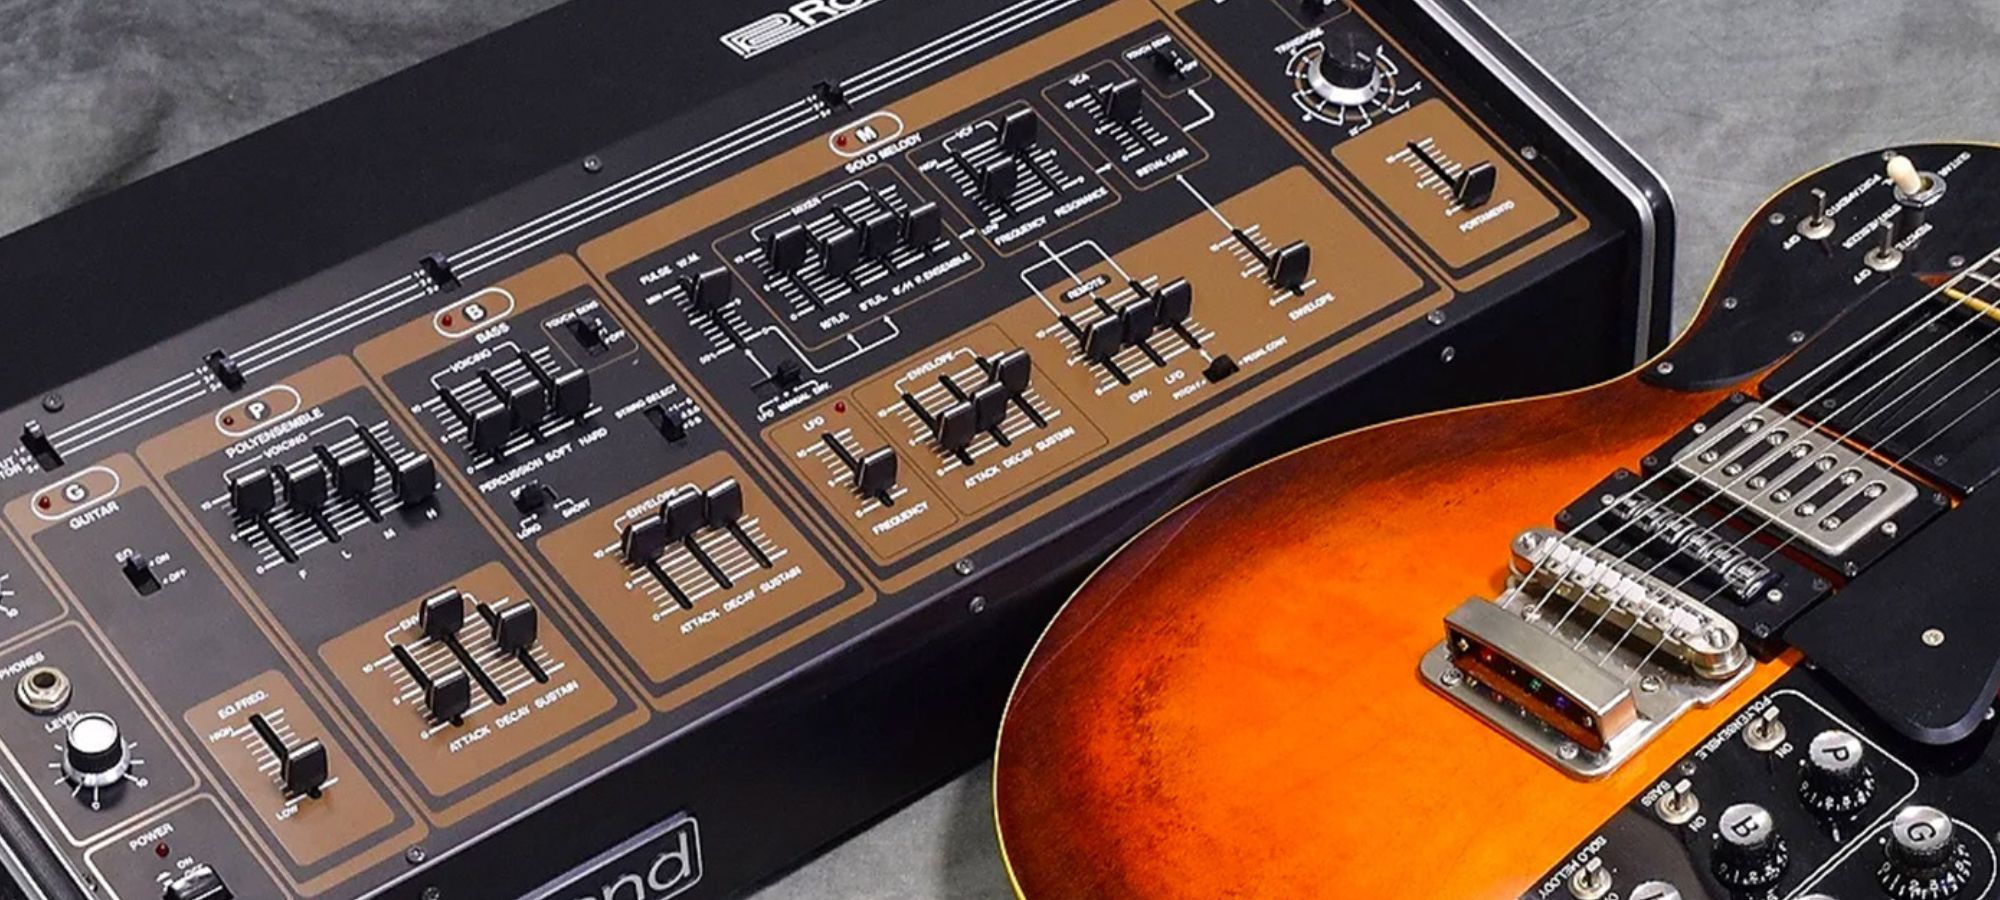 What Is The Best Guitar Synthesizer